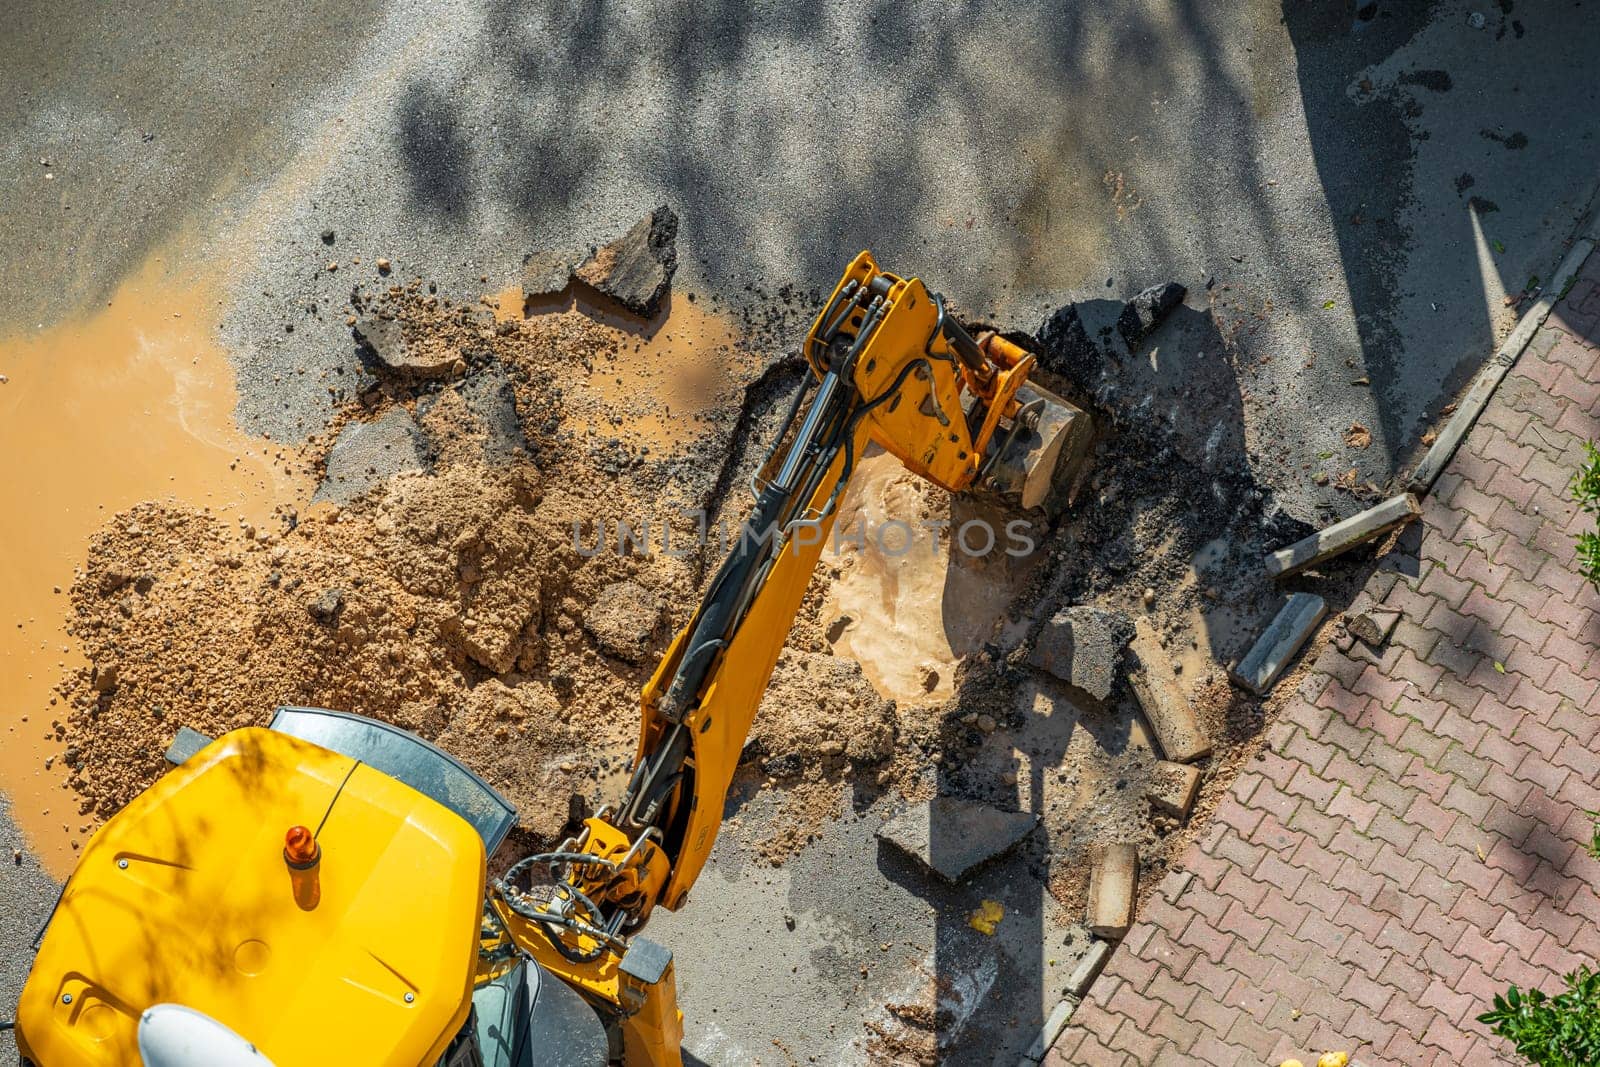 Digger digging asphalt to repair a water fault in a street by Sonat